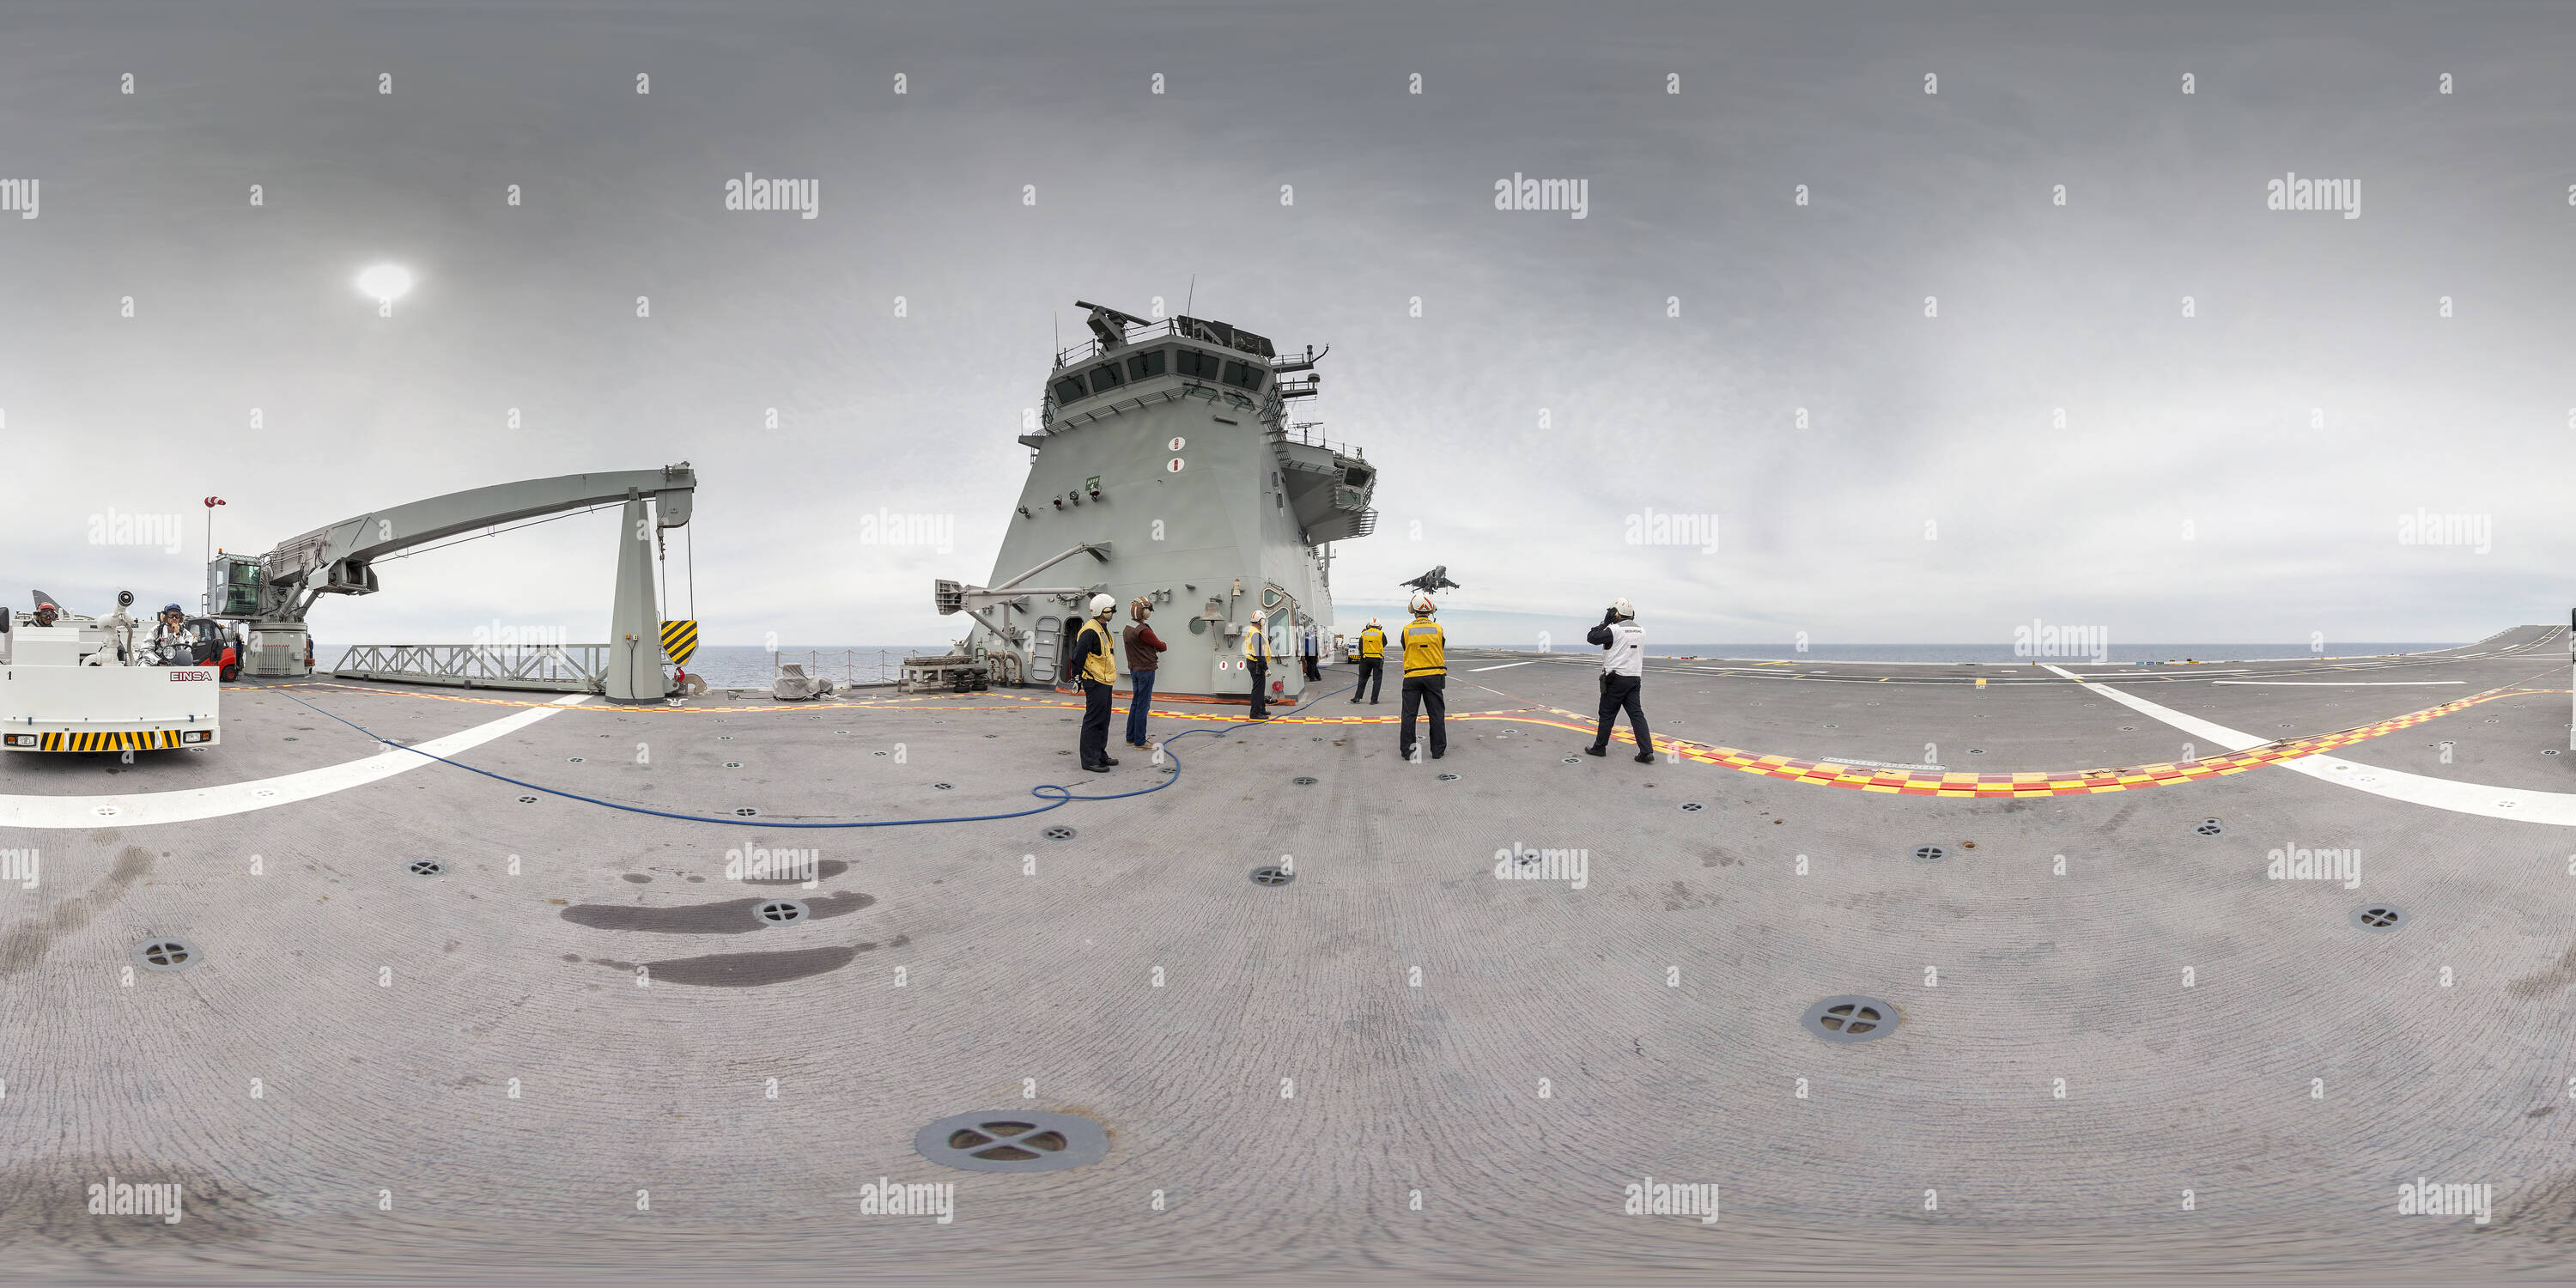 360 degree panoramic view of harrier landing in The spanish amphibious ship aircraft carrier 'Juan Carlos I'